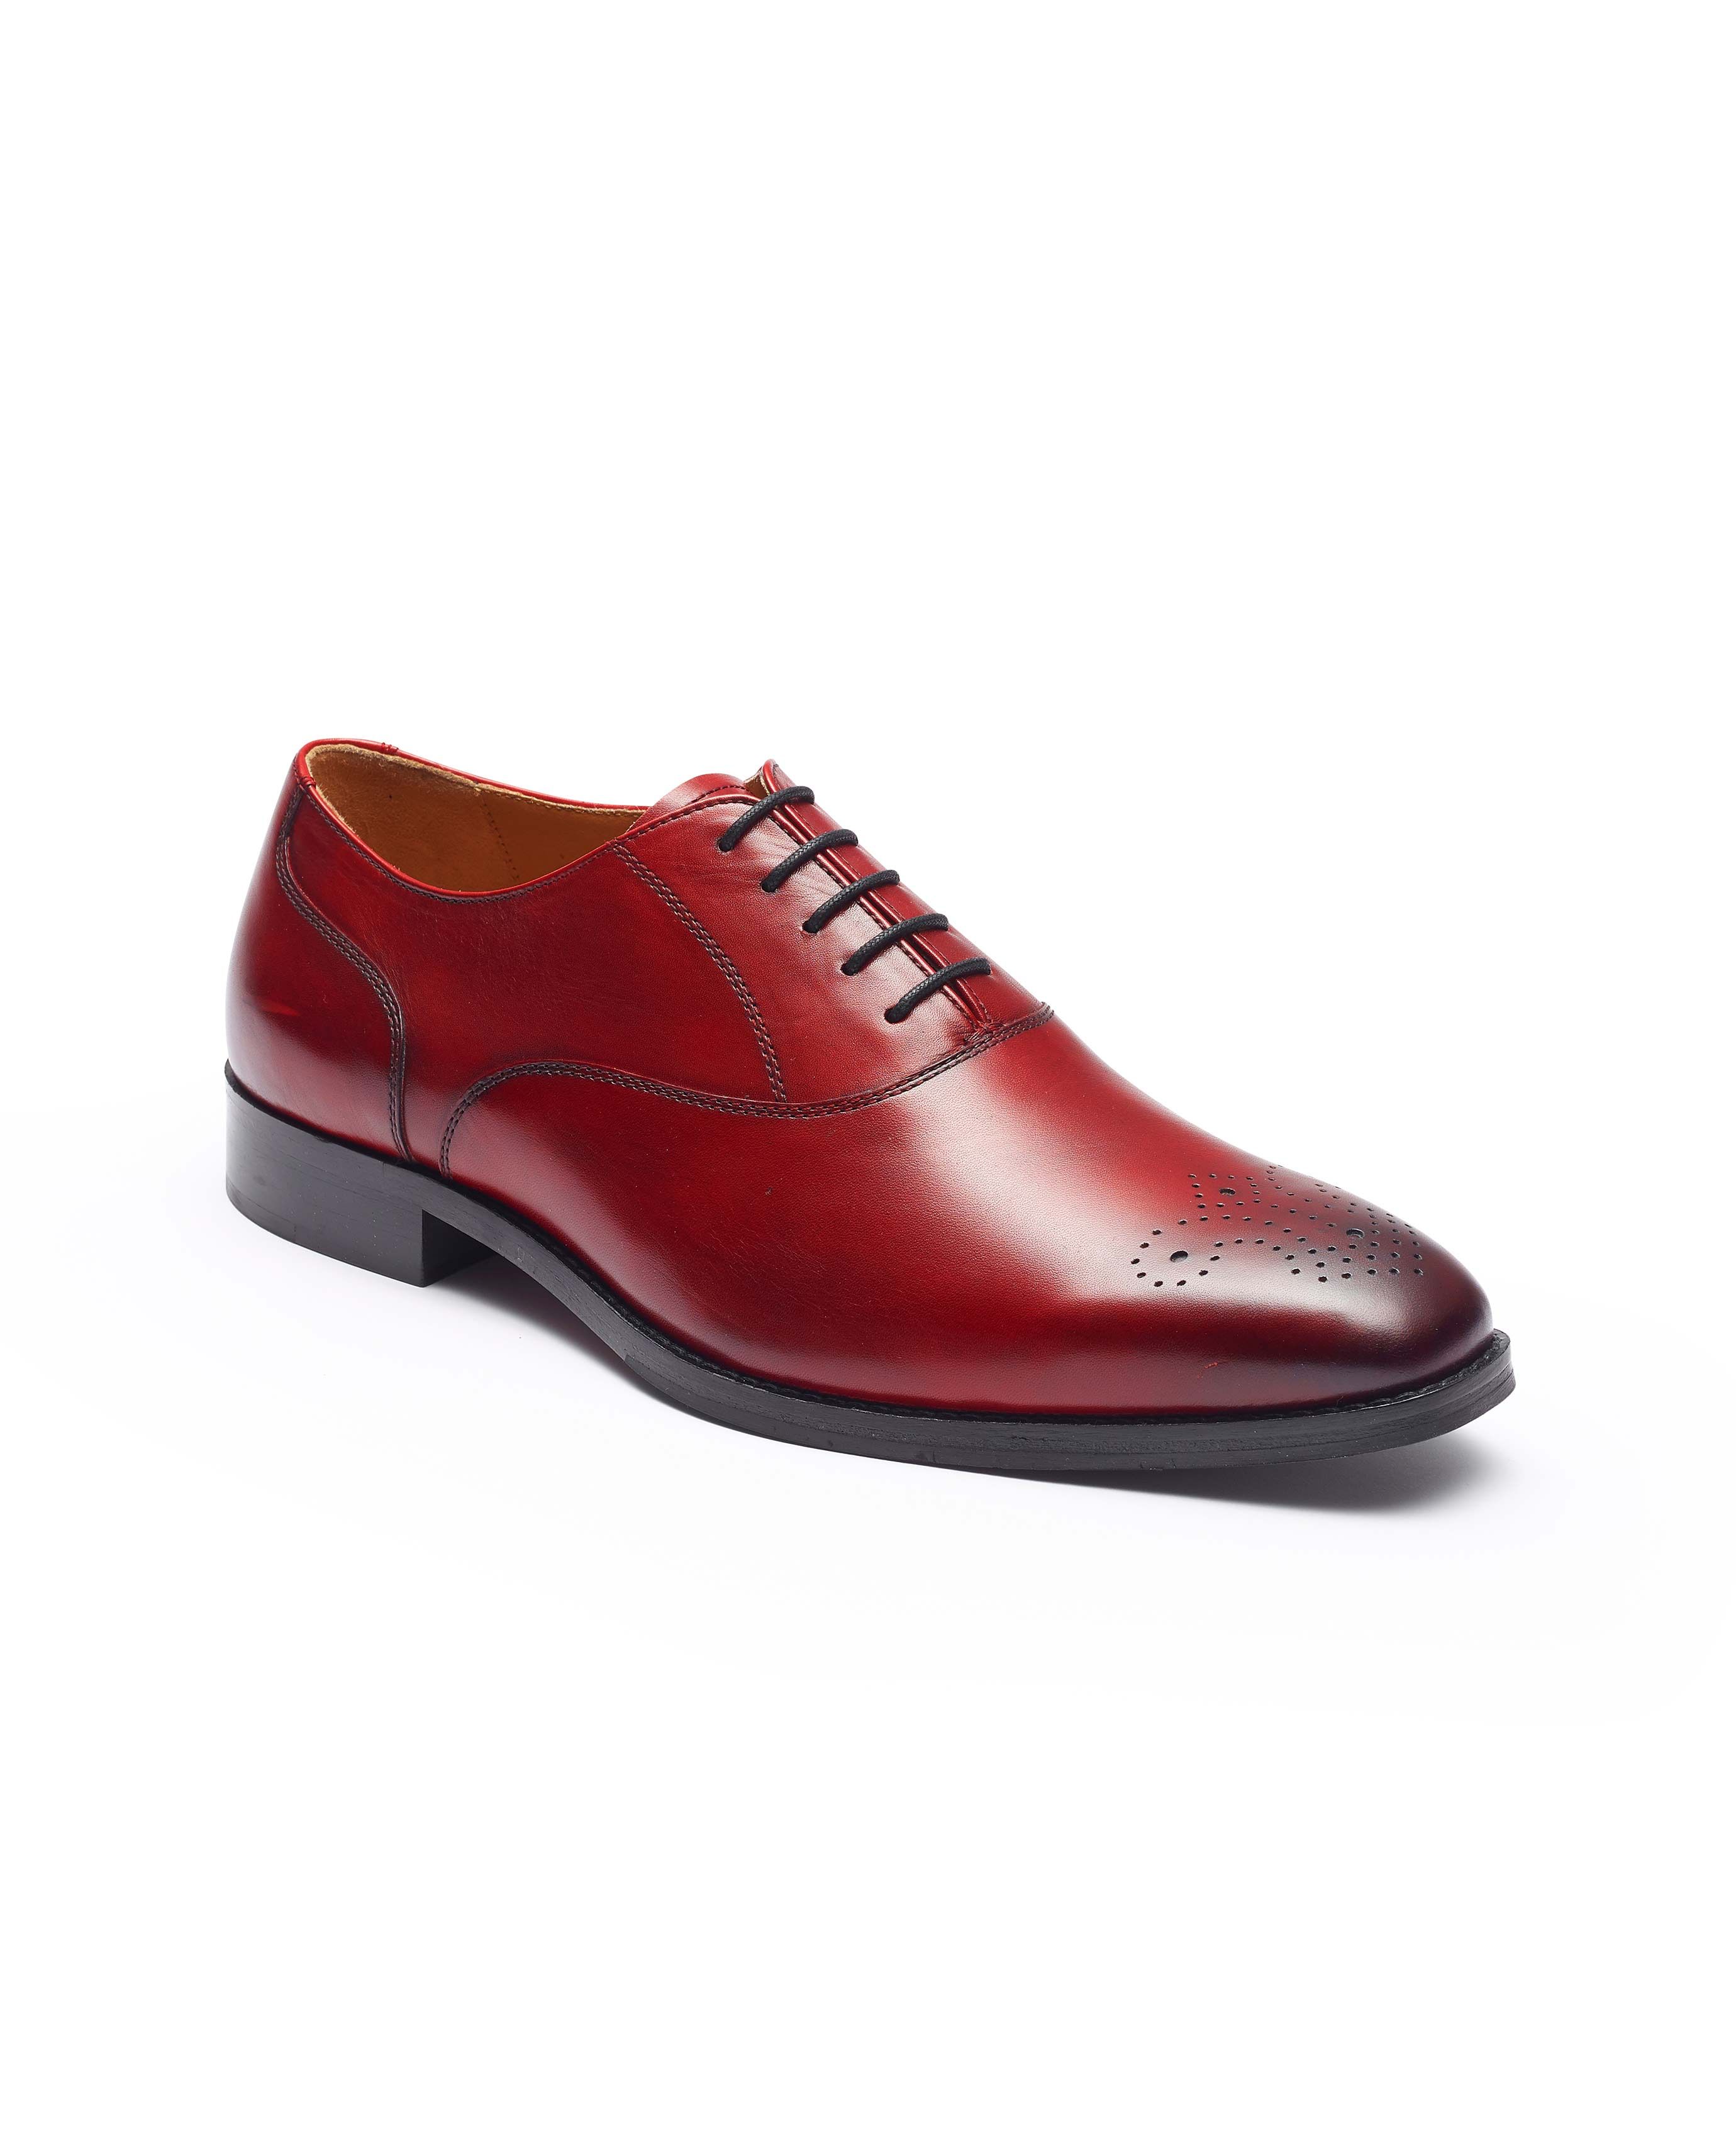 Men's Oxblood Leather Hand-Painted Oxford Brogues | Savile Row Co